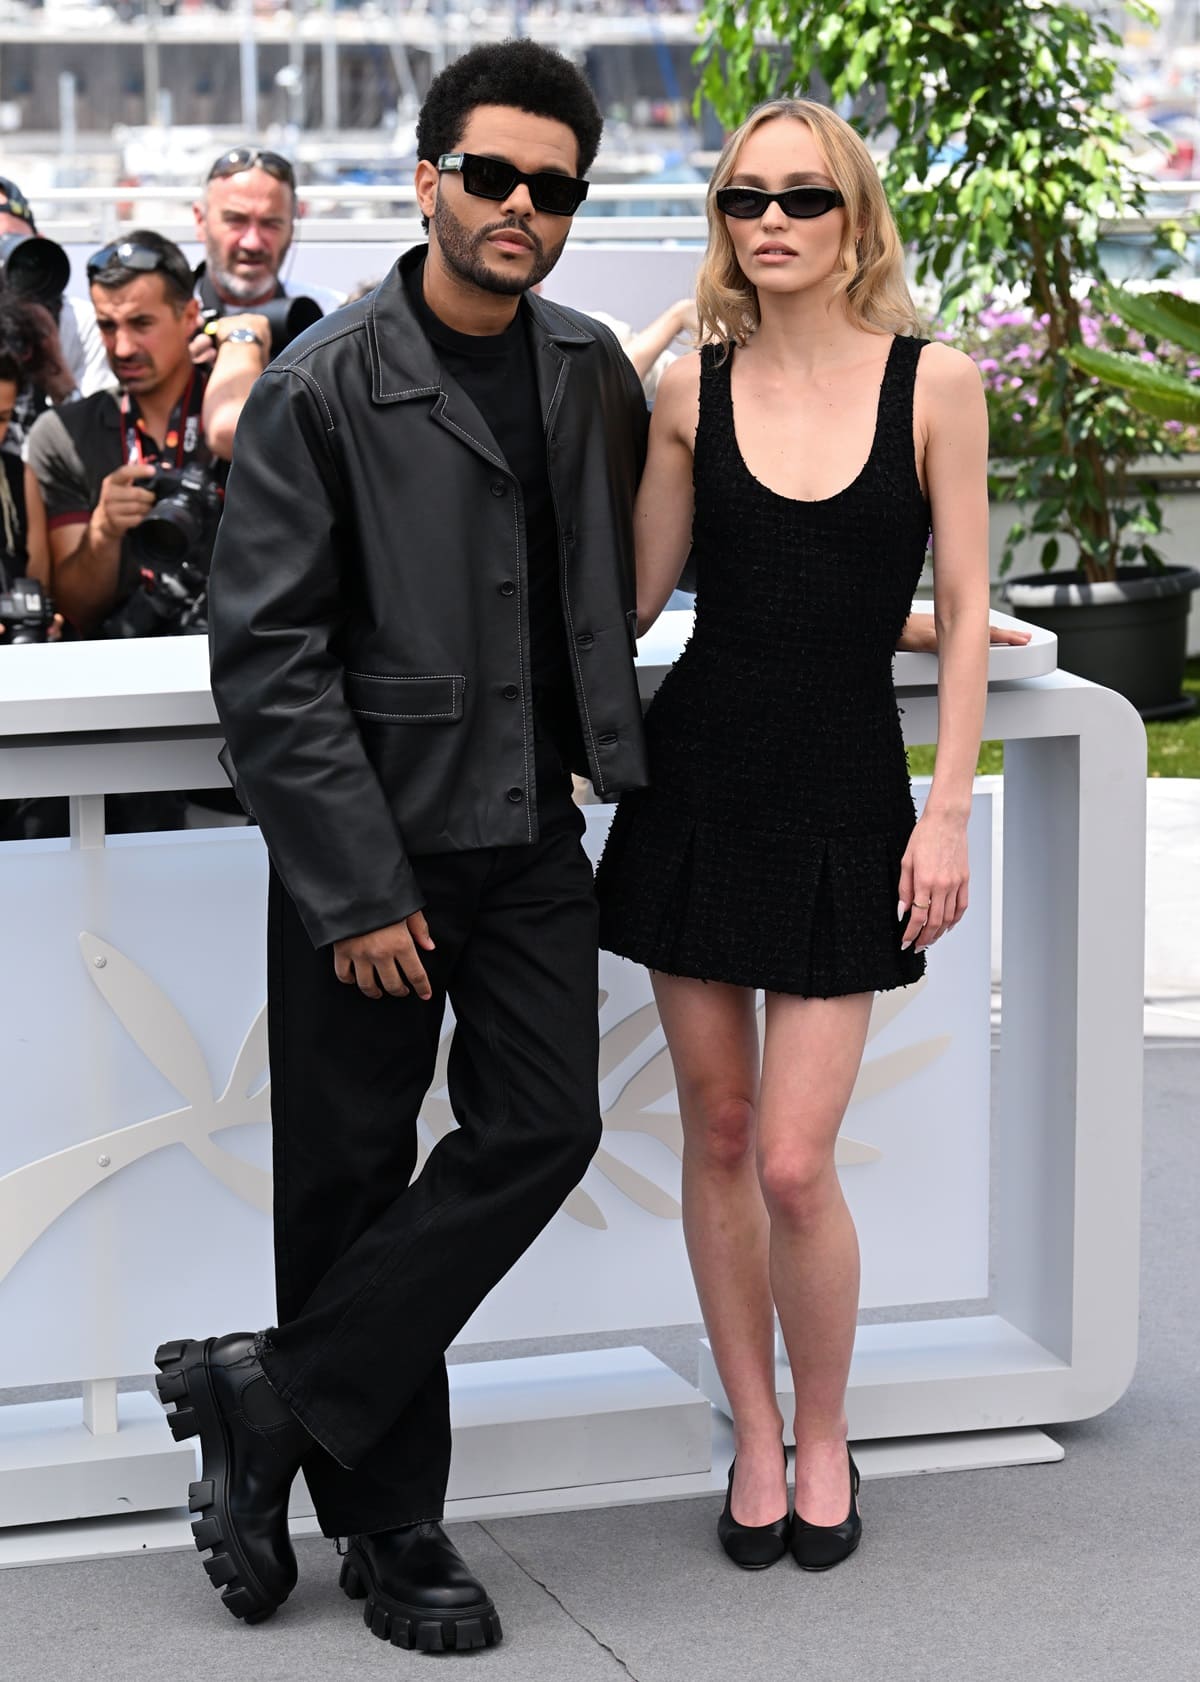 The Weeknd, with a height of approximately 5 feet 6 ¾ inches (169.5 cm), is taller than Lily-Rose Depp, who stands at about 5 feet 3 inches (160 cm)